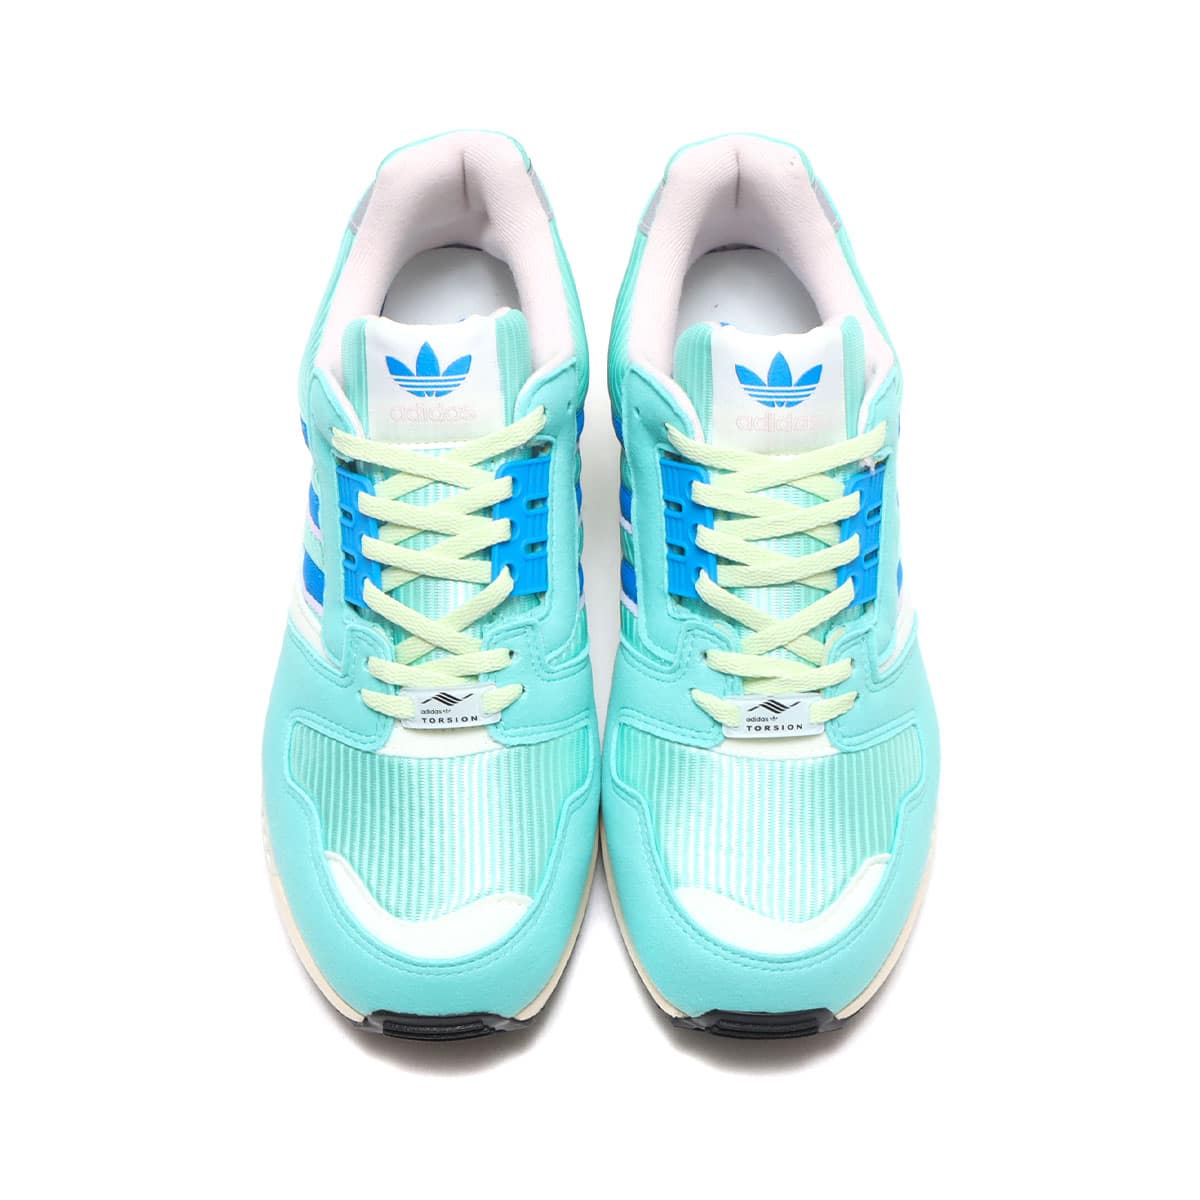 adidas ZX 8000 ALMOST LIME/ECLU TINT/BLUE RUSH 22SS-I